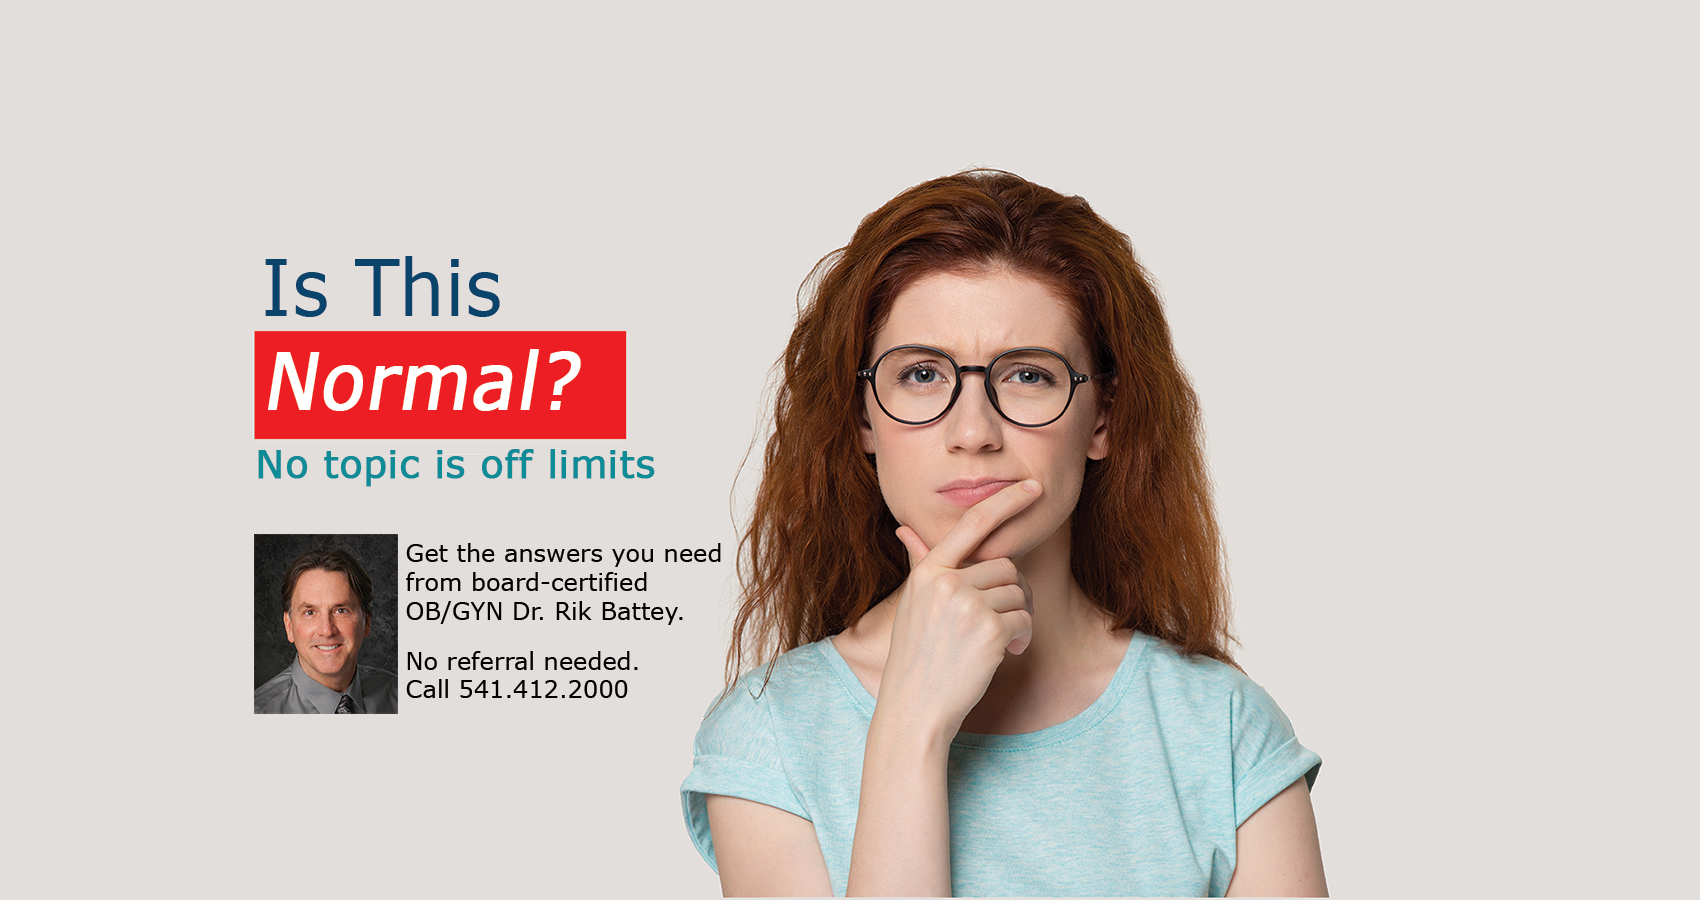 Young woman wondering and looking concerned. Text: Is this normal? No topic is off limits. Get the answers you need from board-certified OB/GYN Dr. Rik Battey. No referral needed. Call 541-412-2000.